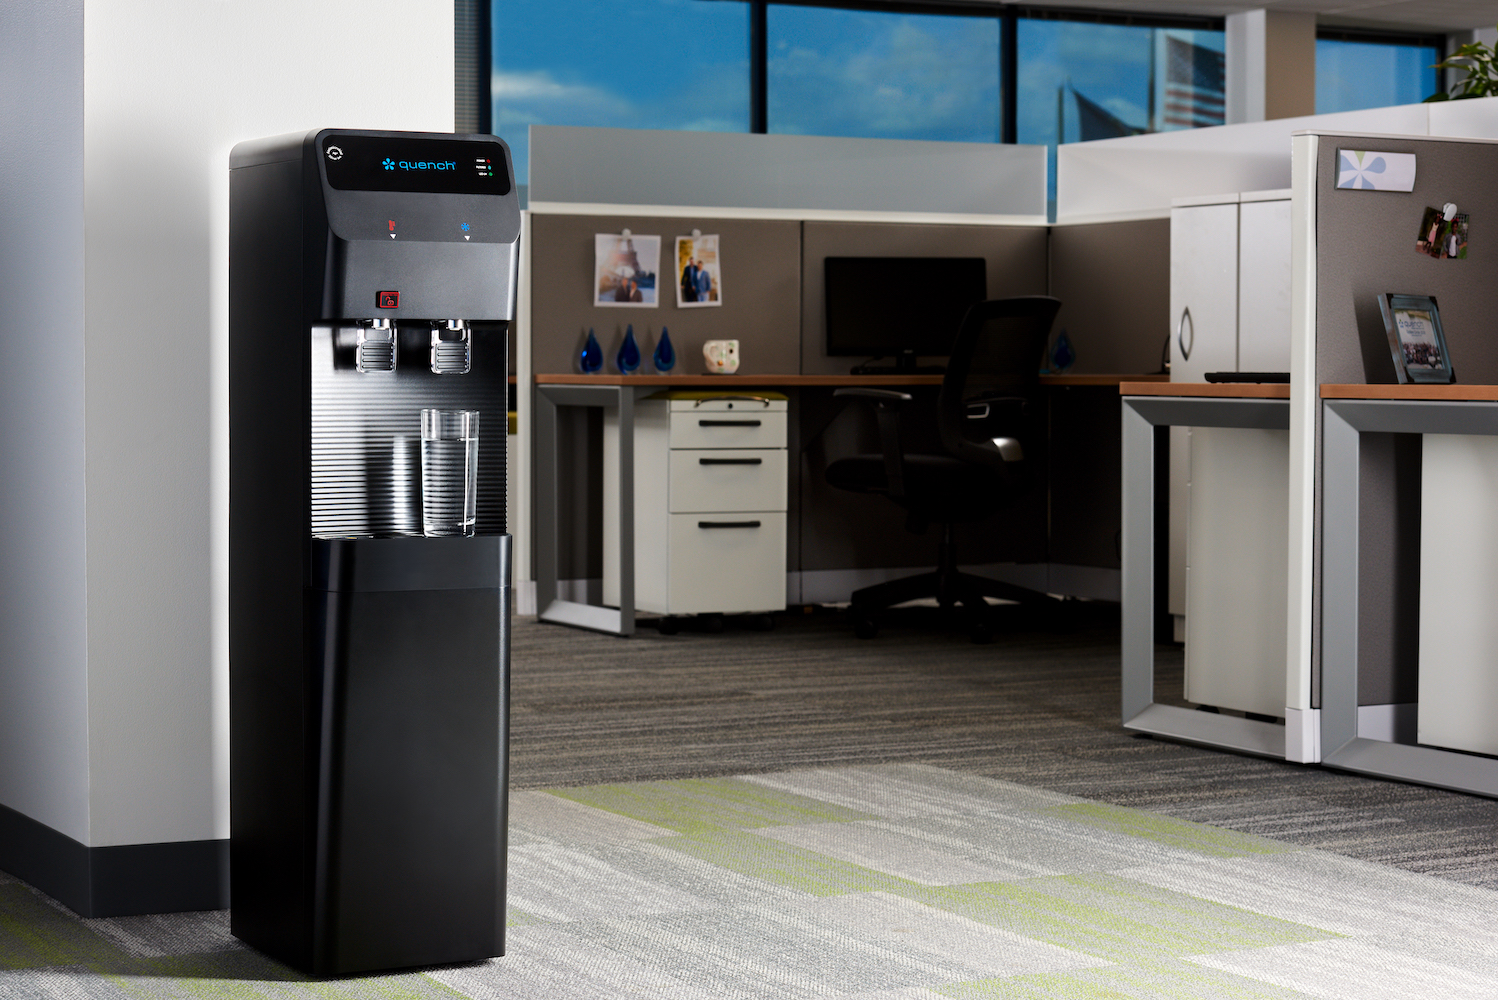 water cooler in an office setting